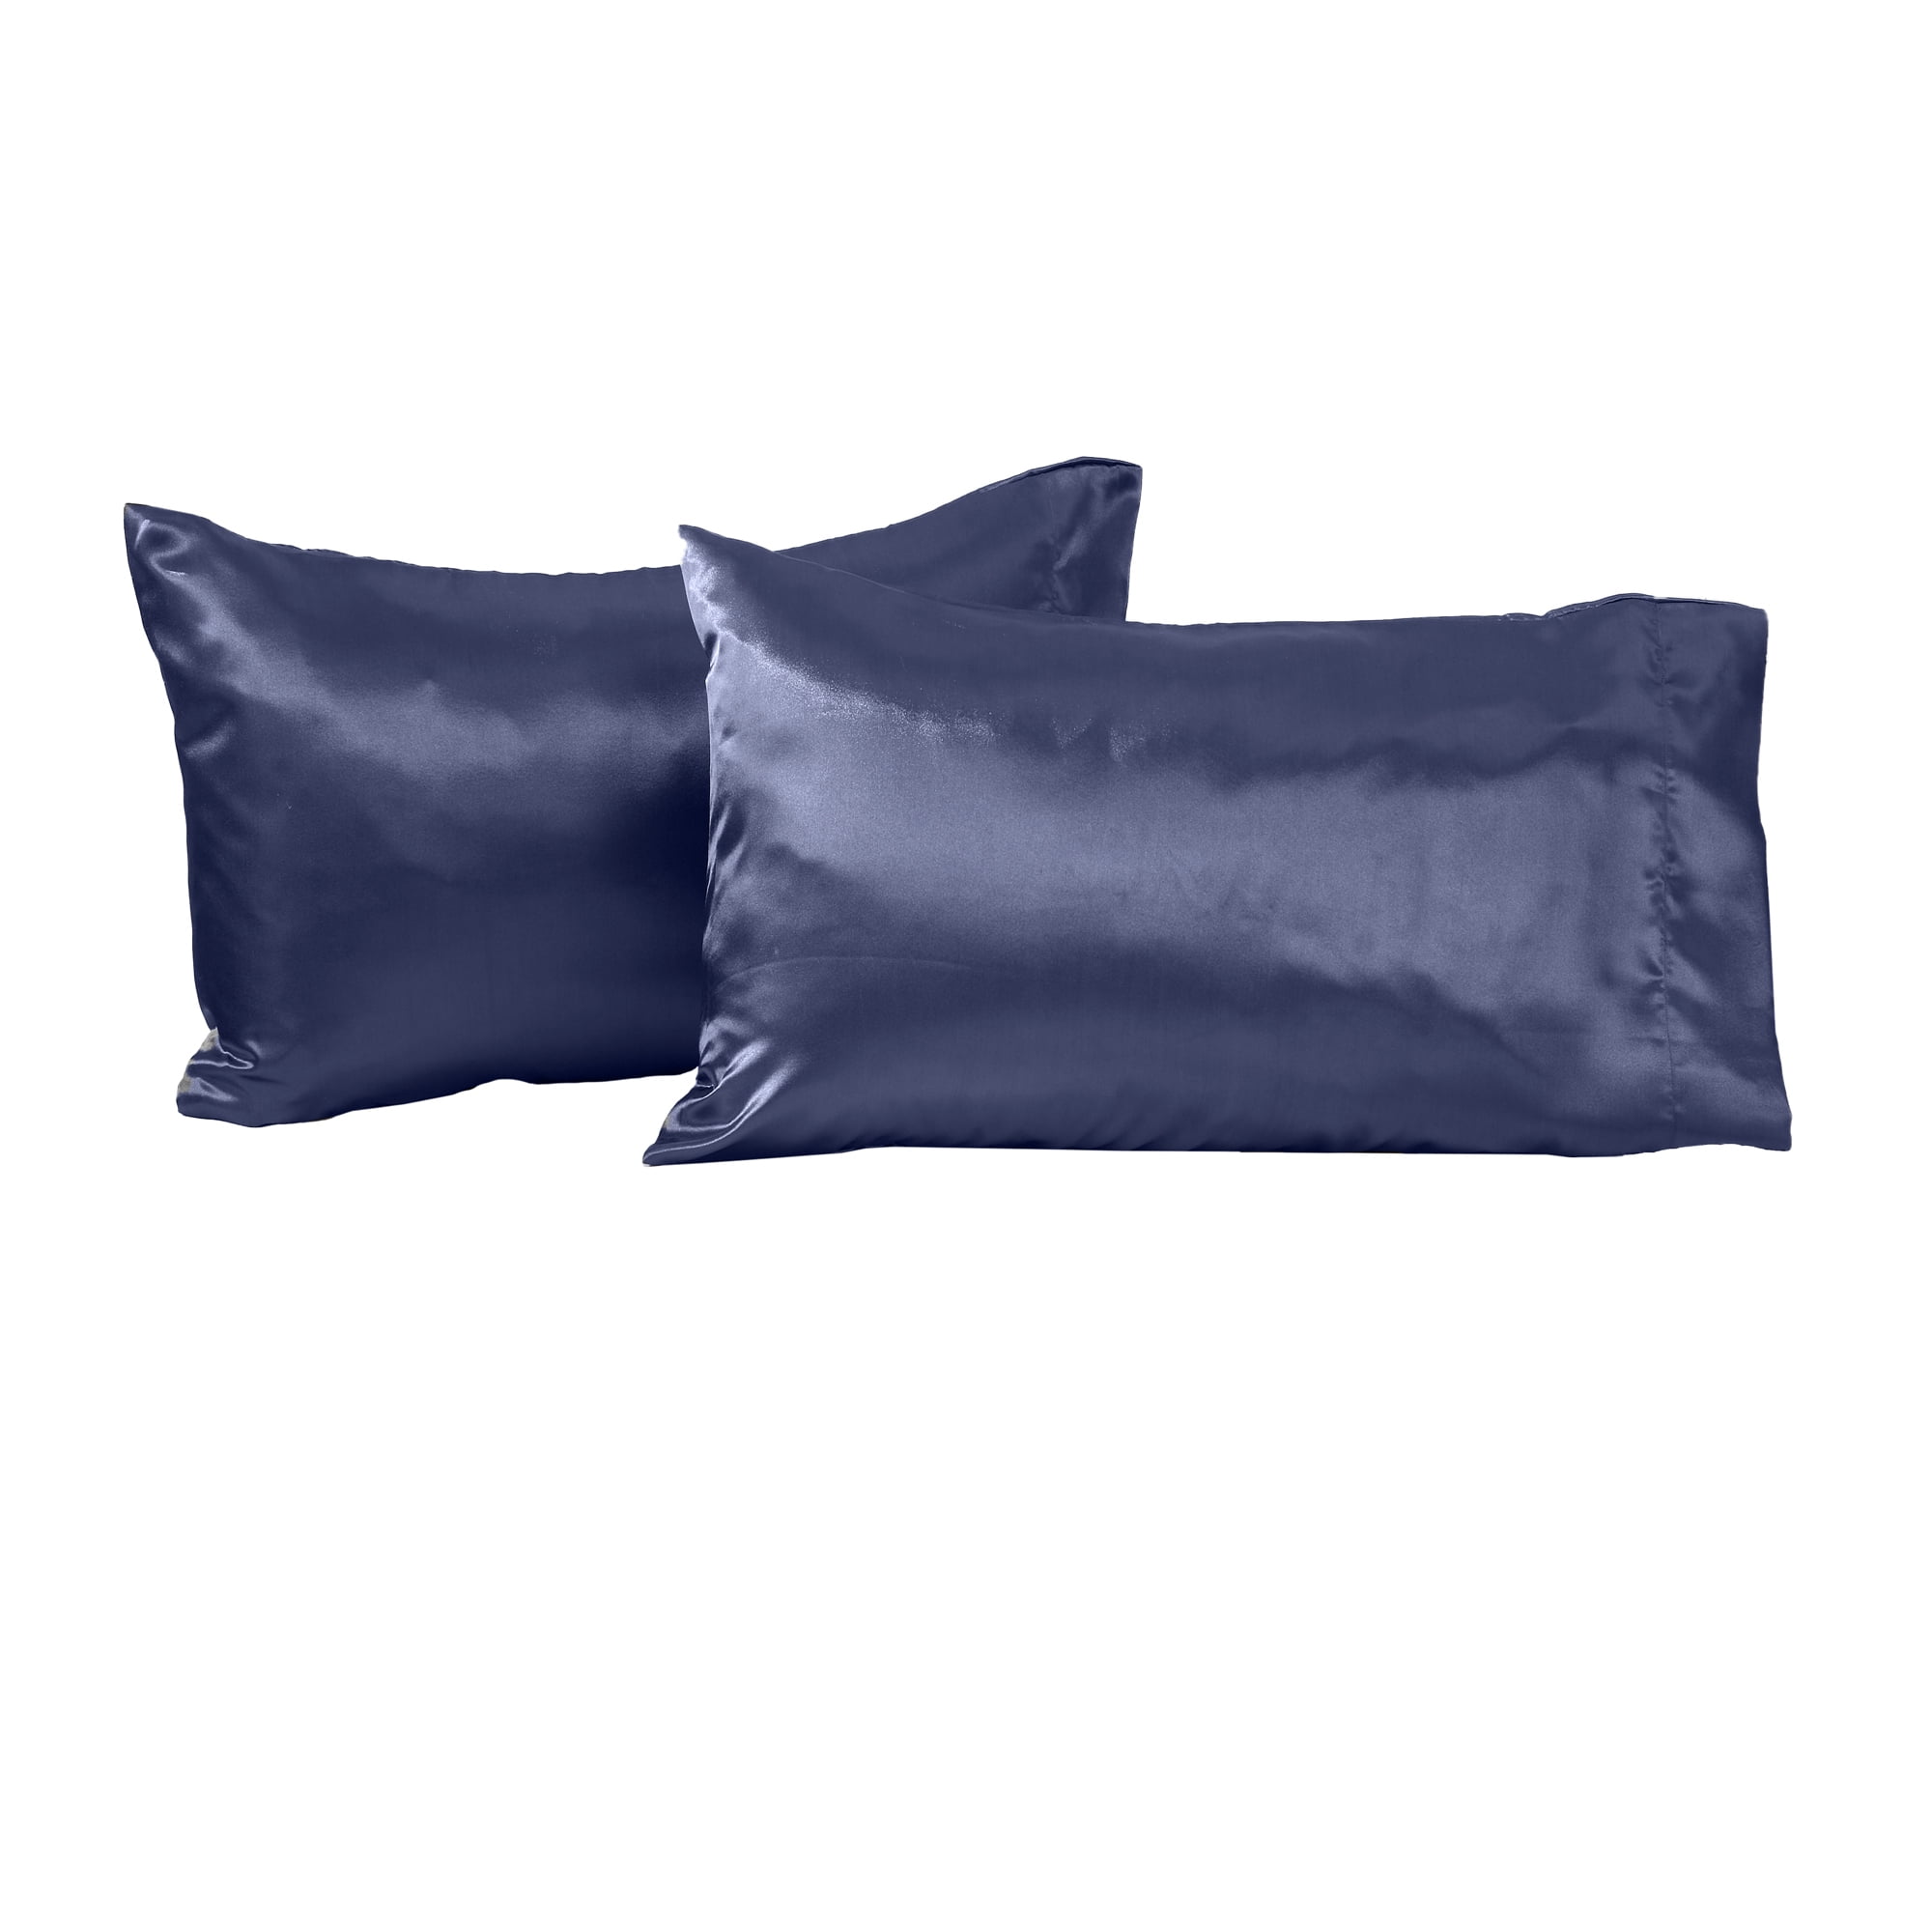 My Pillow 6 Pack Navy Cotton Towels (2 Bath 56” x 30”, 2 Hand 30